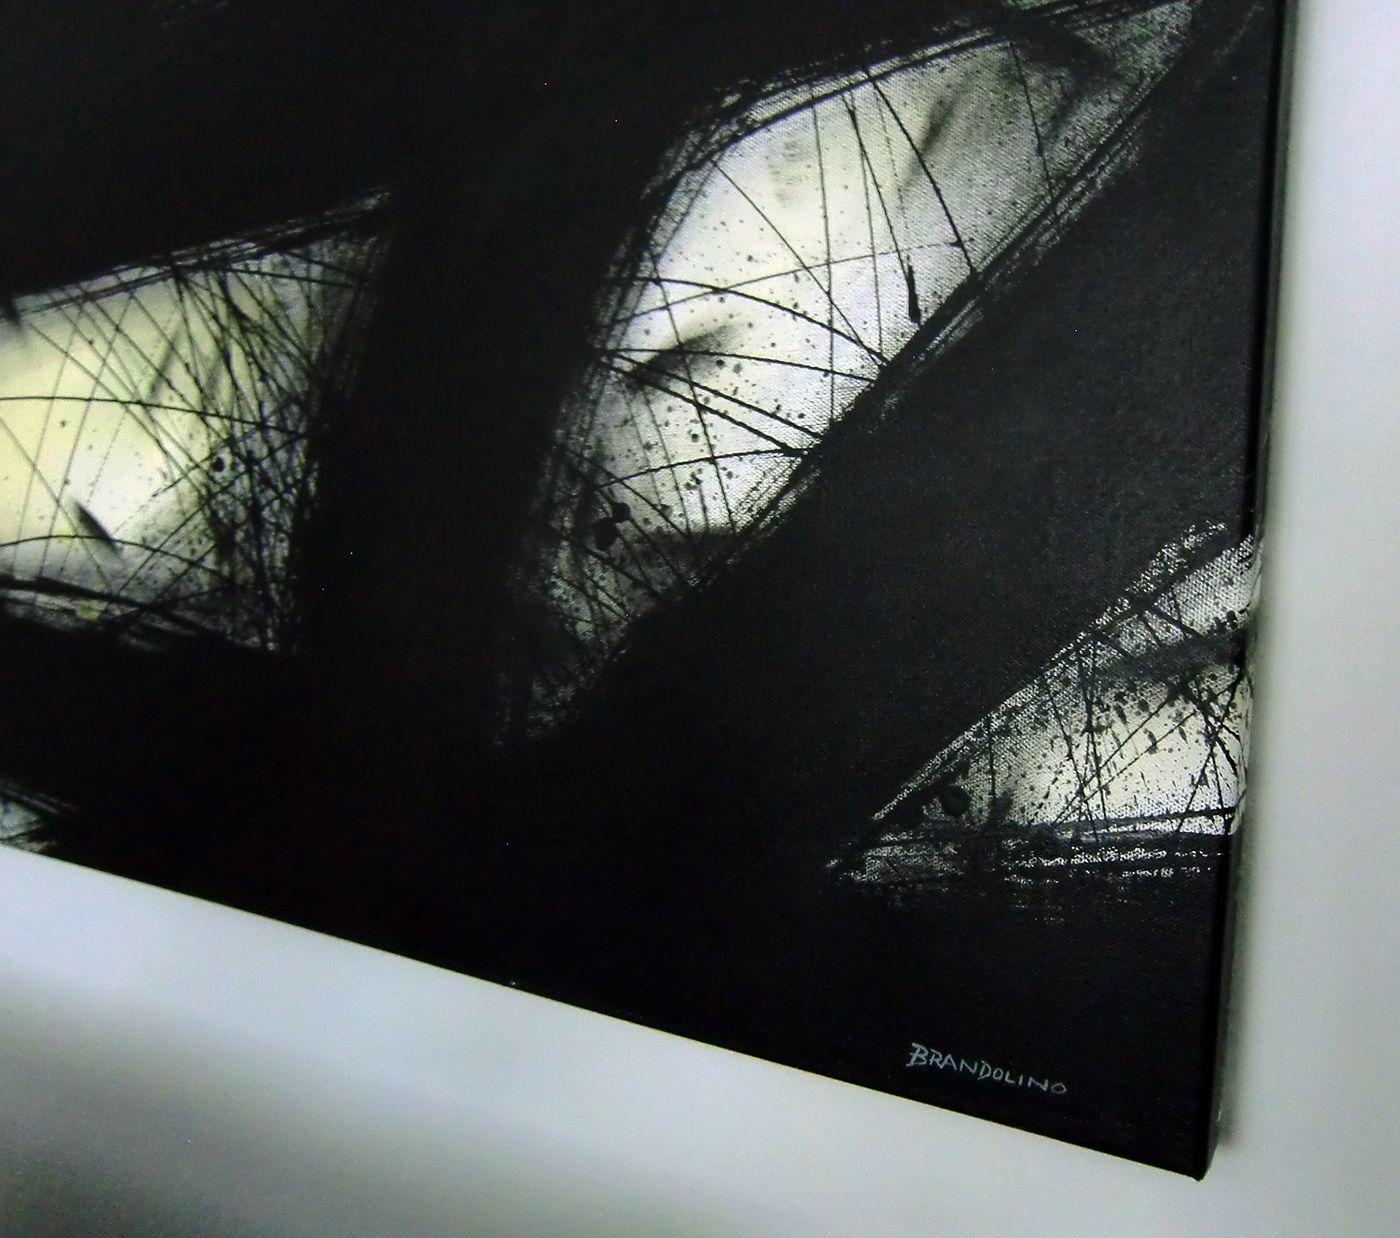 Moving Form, Painting, Acrylic on Canvas - Black Abstract Painting by Ray Brandolino